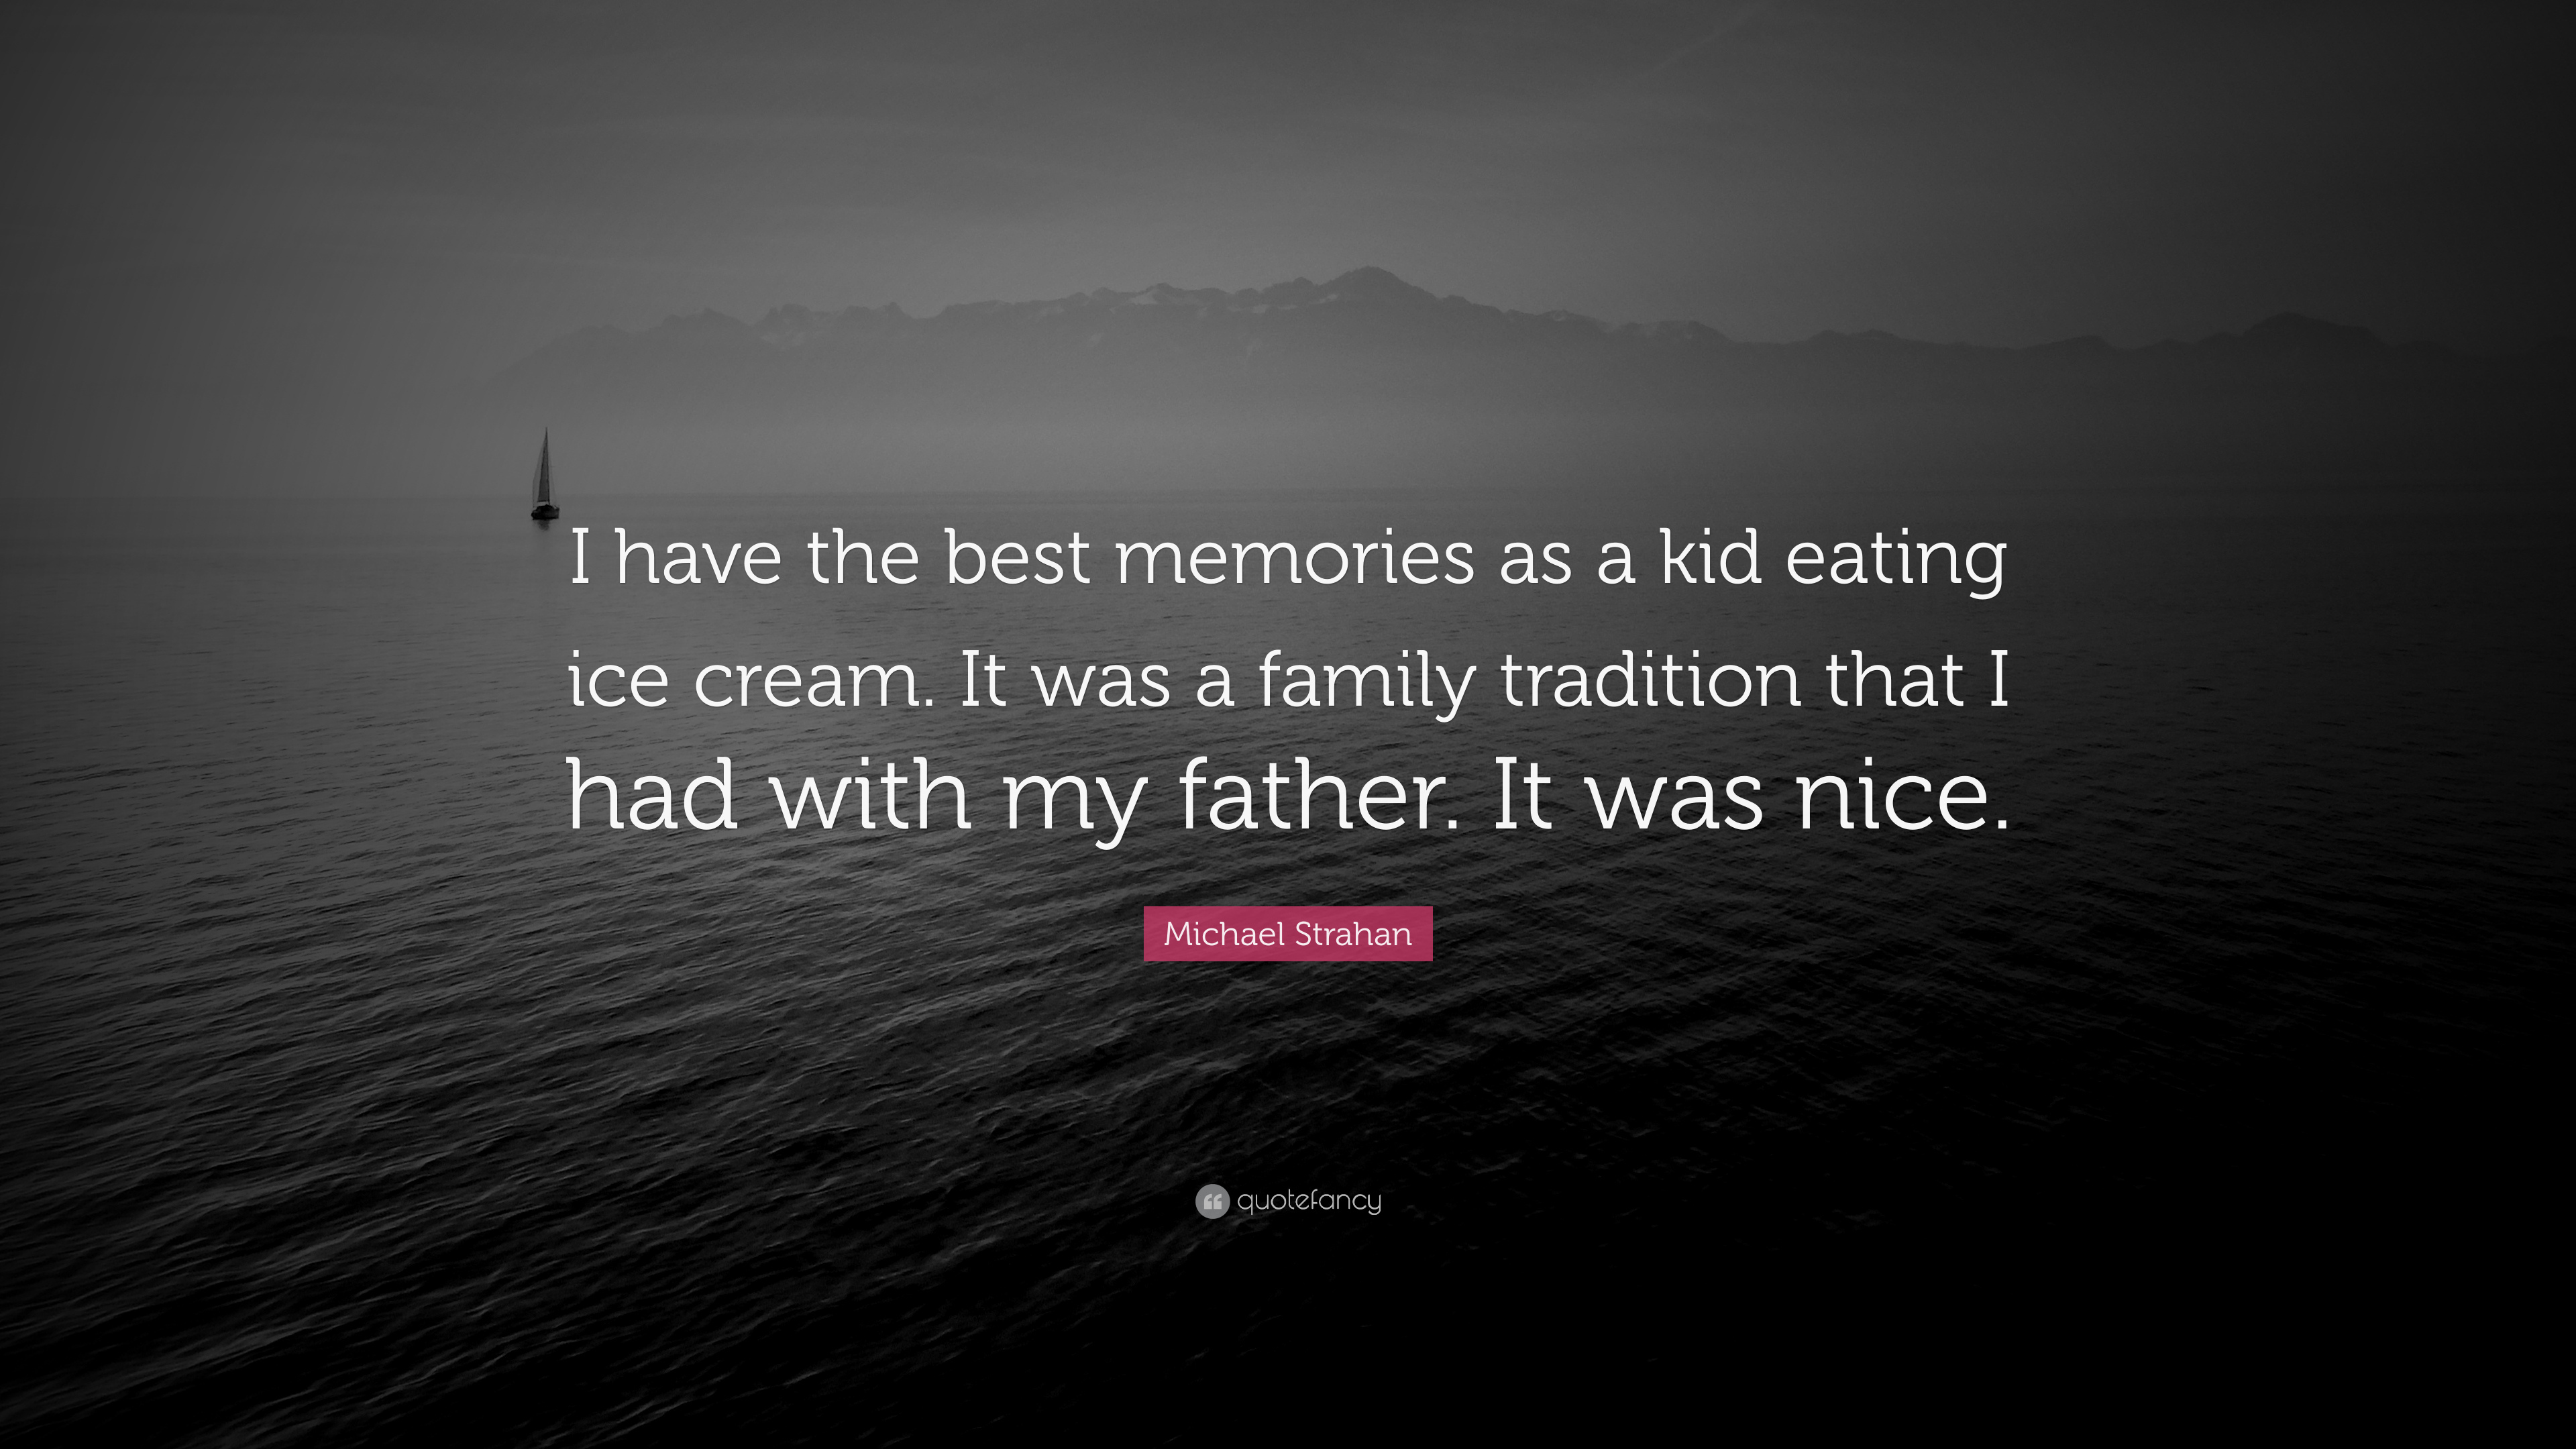 Michael Strahan Quote: “I have the best memories as a kid